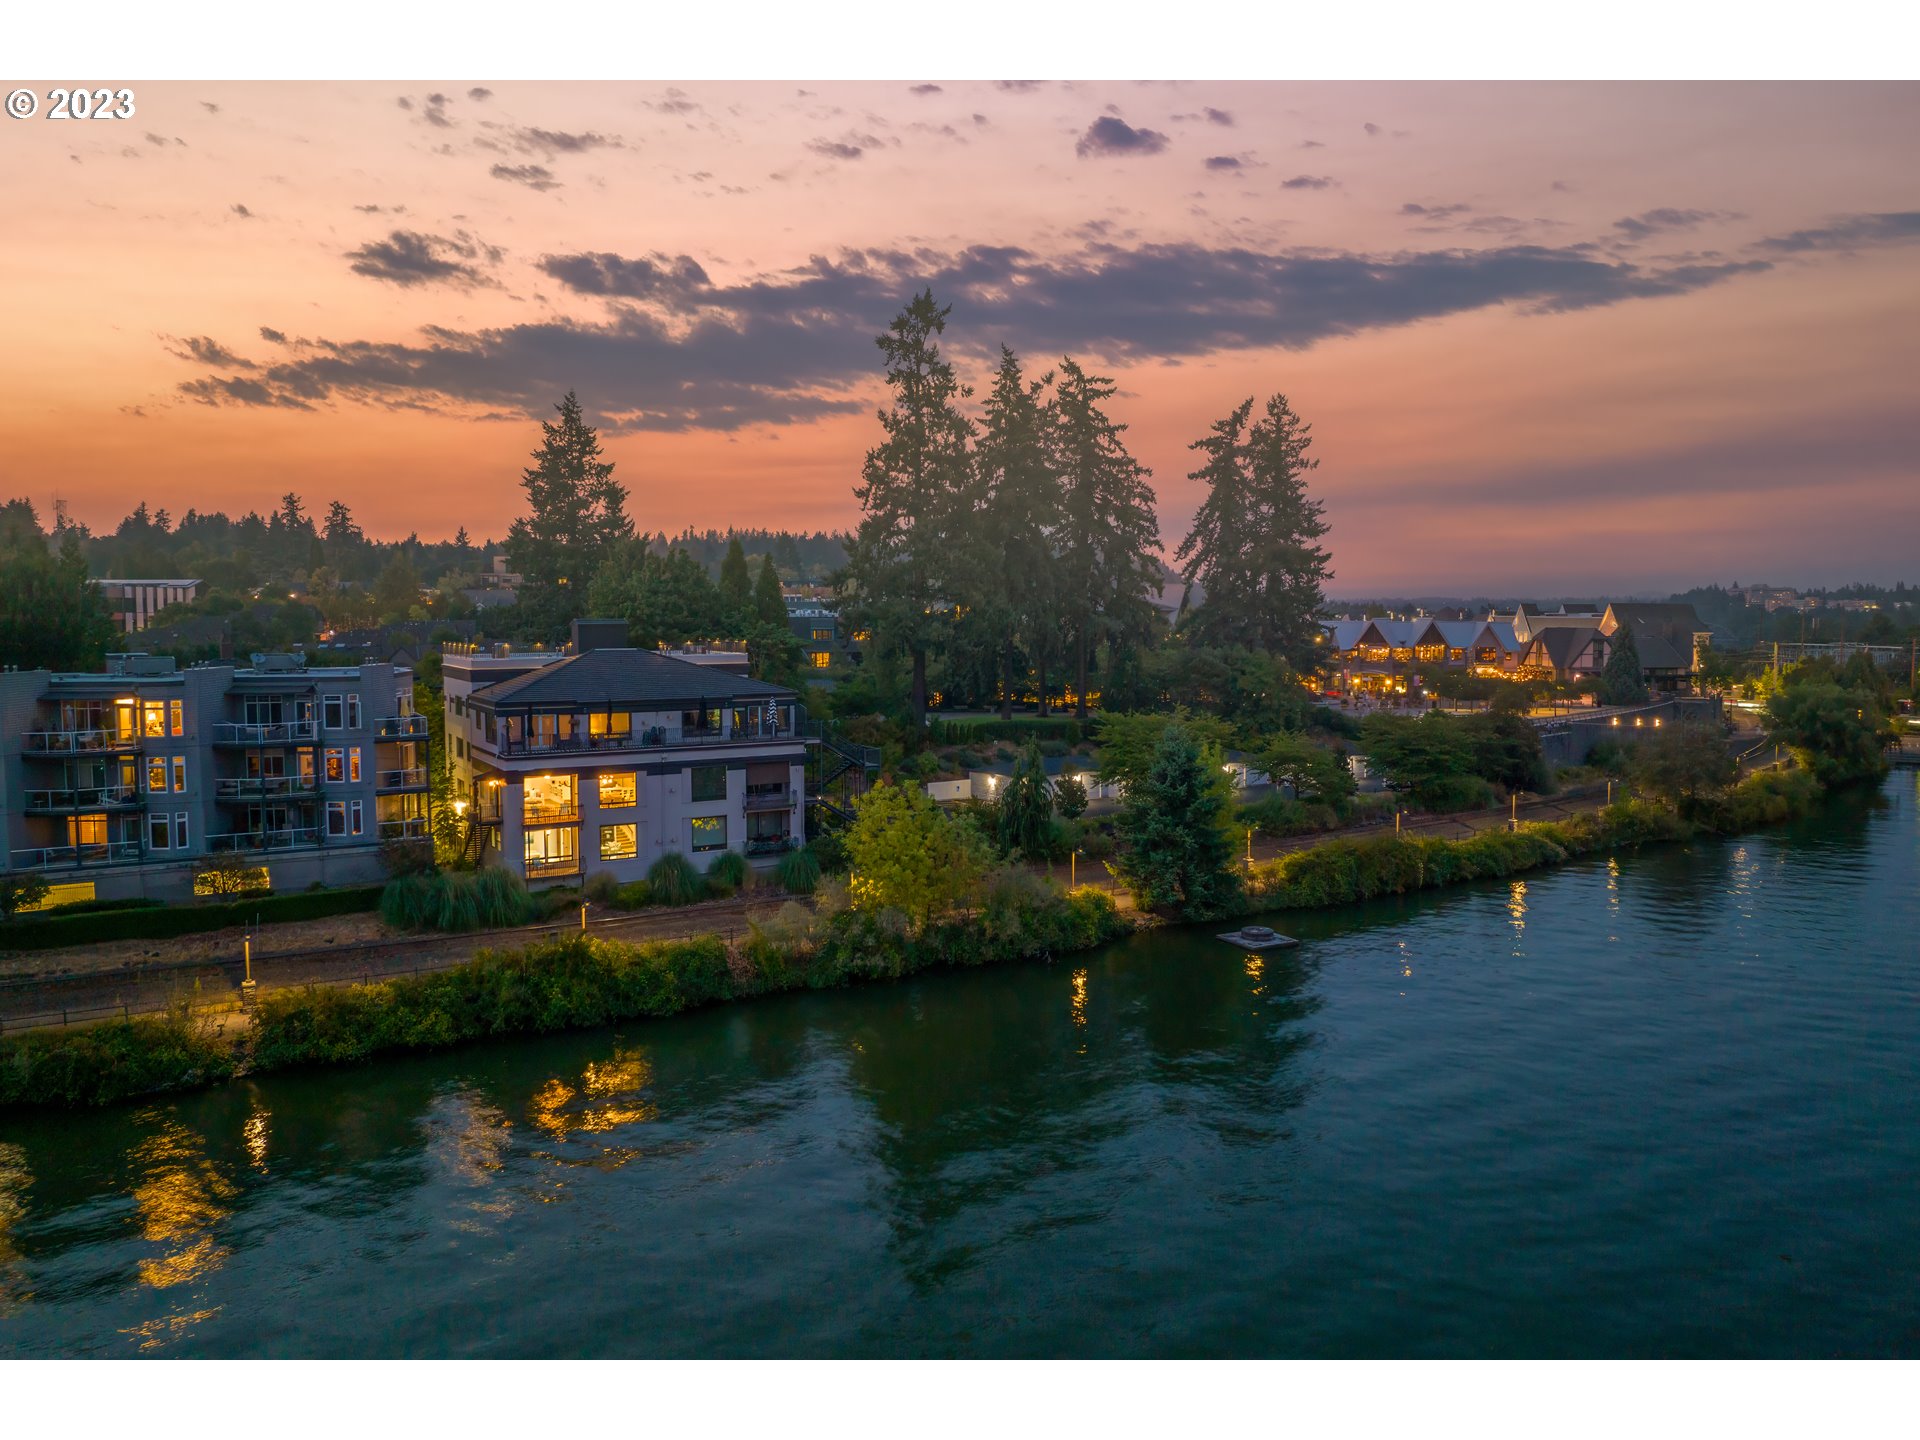 Live in the heart of Lake Oswego's Lakewood Bay in this waterfront condo nestled in a building steeped in the city's history. Once a power plant that eventually became an apartment building and is now home to five units of waterfront condos, this home features incredible views from almost every room. Completely reimagined by Portland's renowned Phil Chek as his personal residence, this double-unit home with 10' ceilings blends historical elements with all the modern conveniences for effortlessly casual luxury living. Secure, direct elevator access to this three-level home where Chek's signature attention to detail has created light-filled spaces perfect for entertaining and gathering with friends and family.